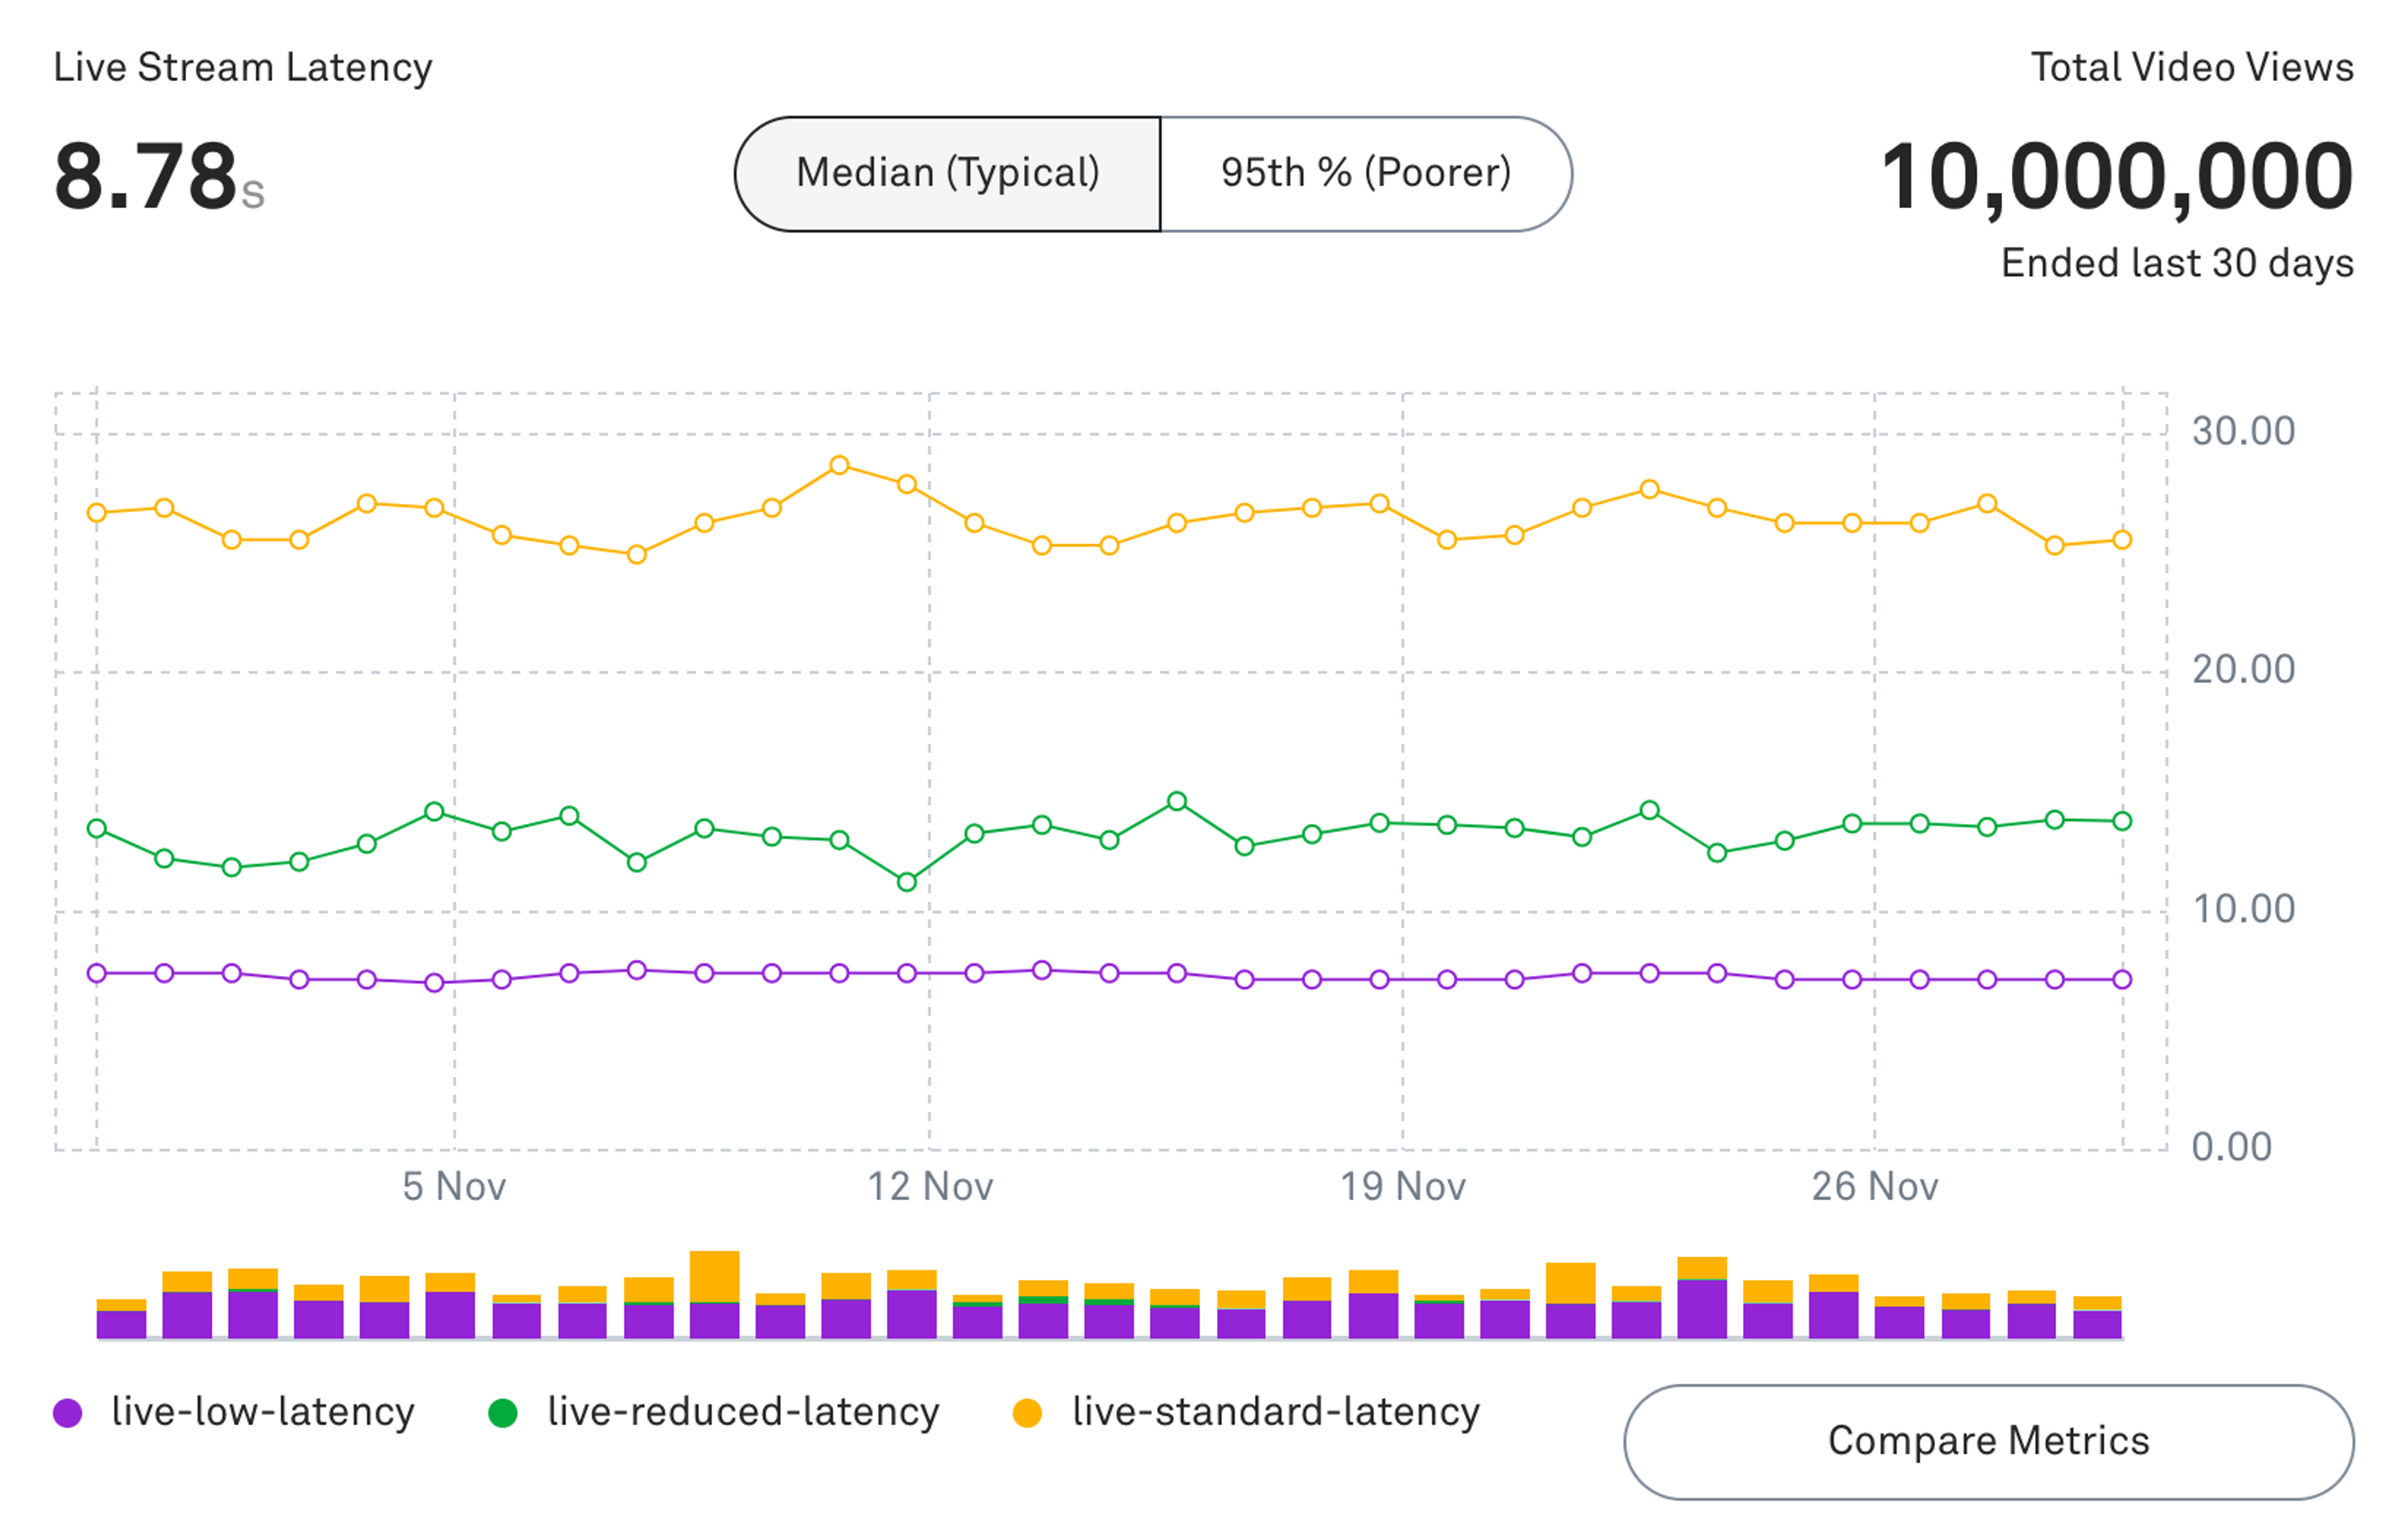 A screen capture of the Live Stream Latency monitoring metric in Mux Data showing latency graphs across all 3 types of latency with an average latency of 8.78s.